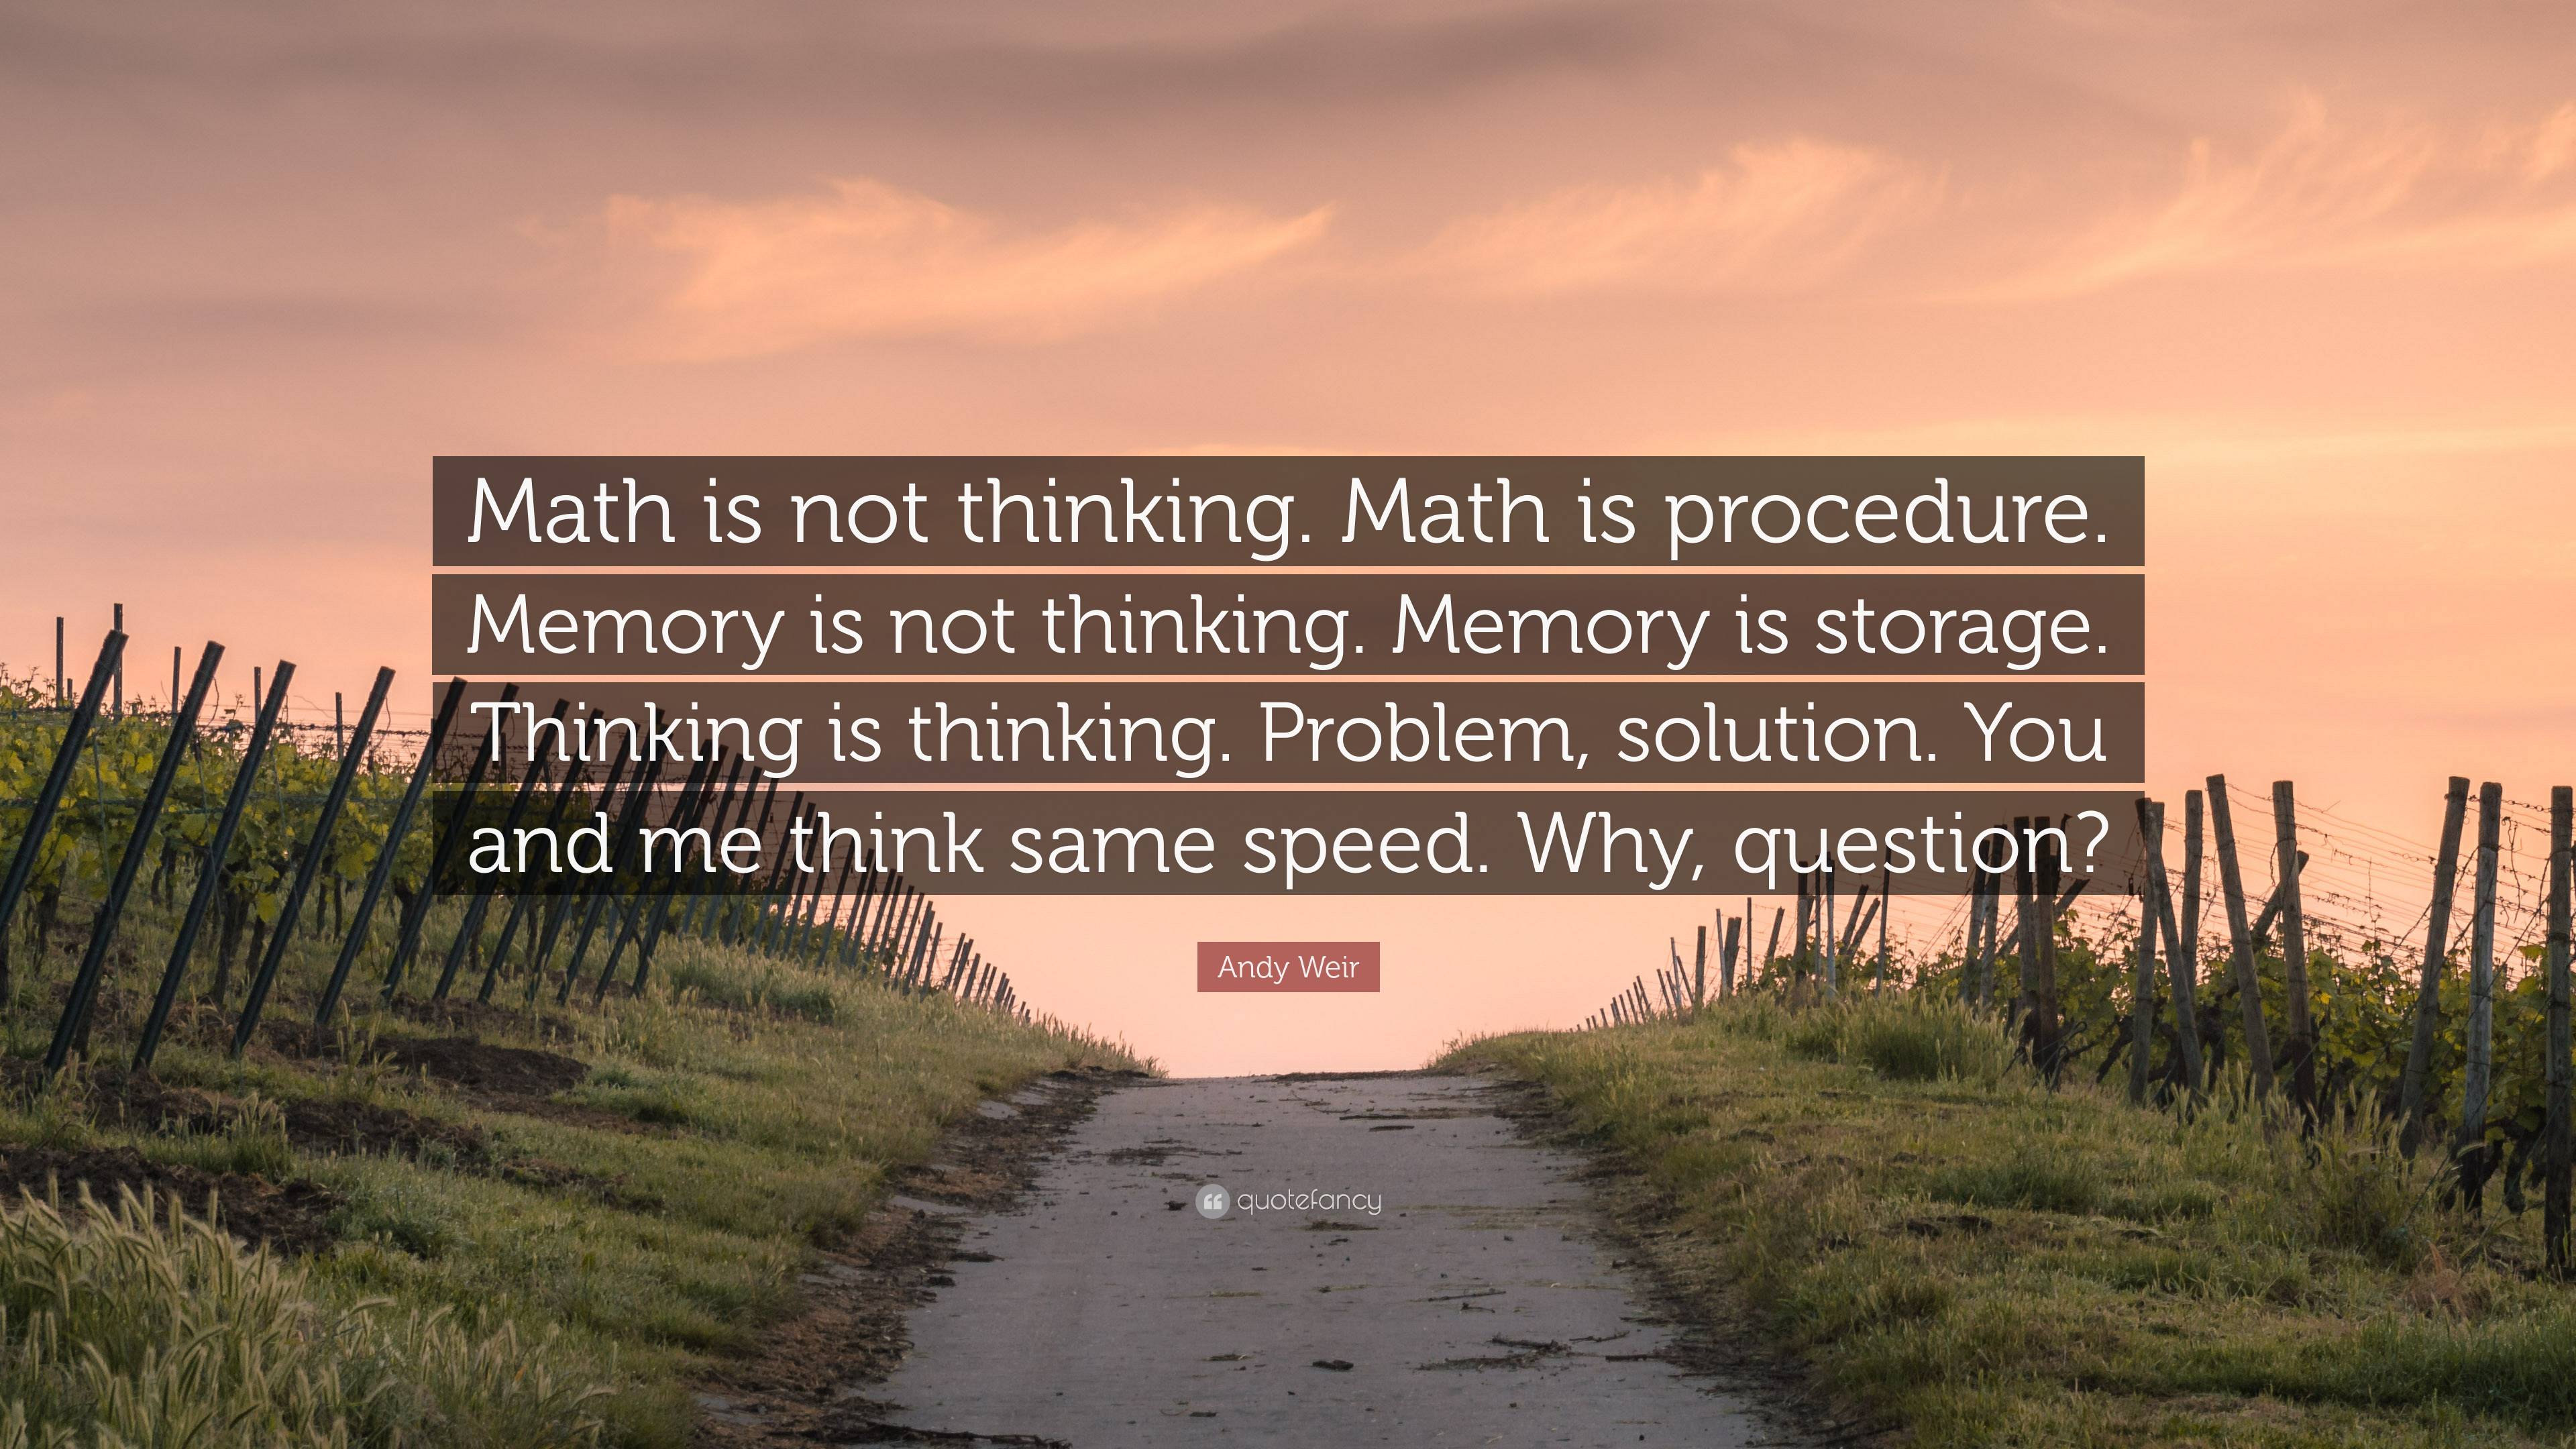 Math is the problem. Thinking is the solution.